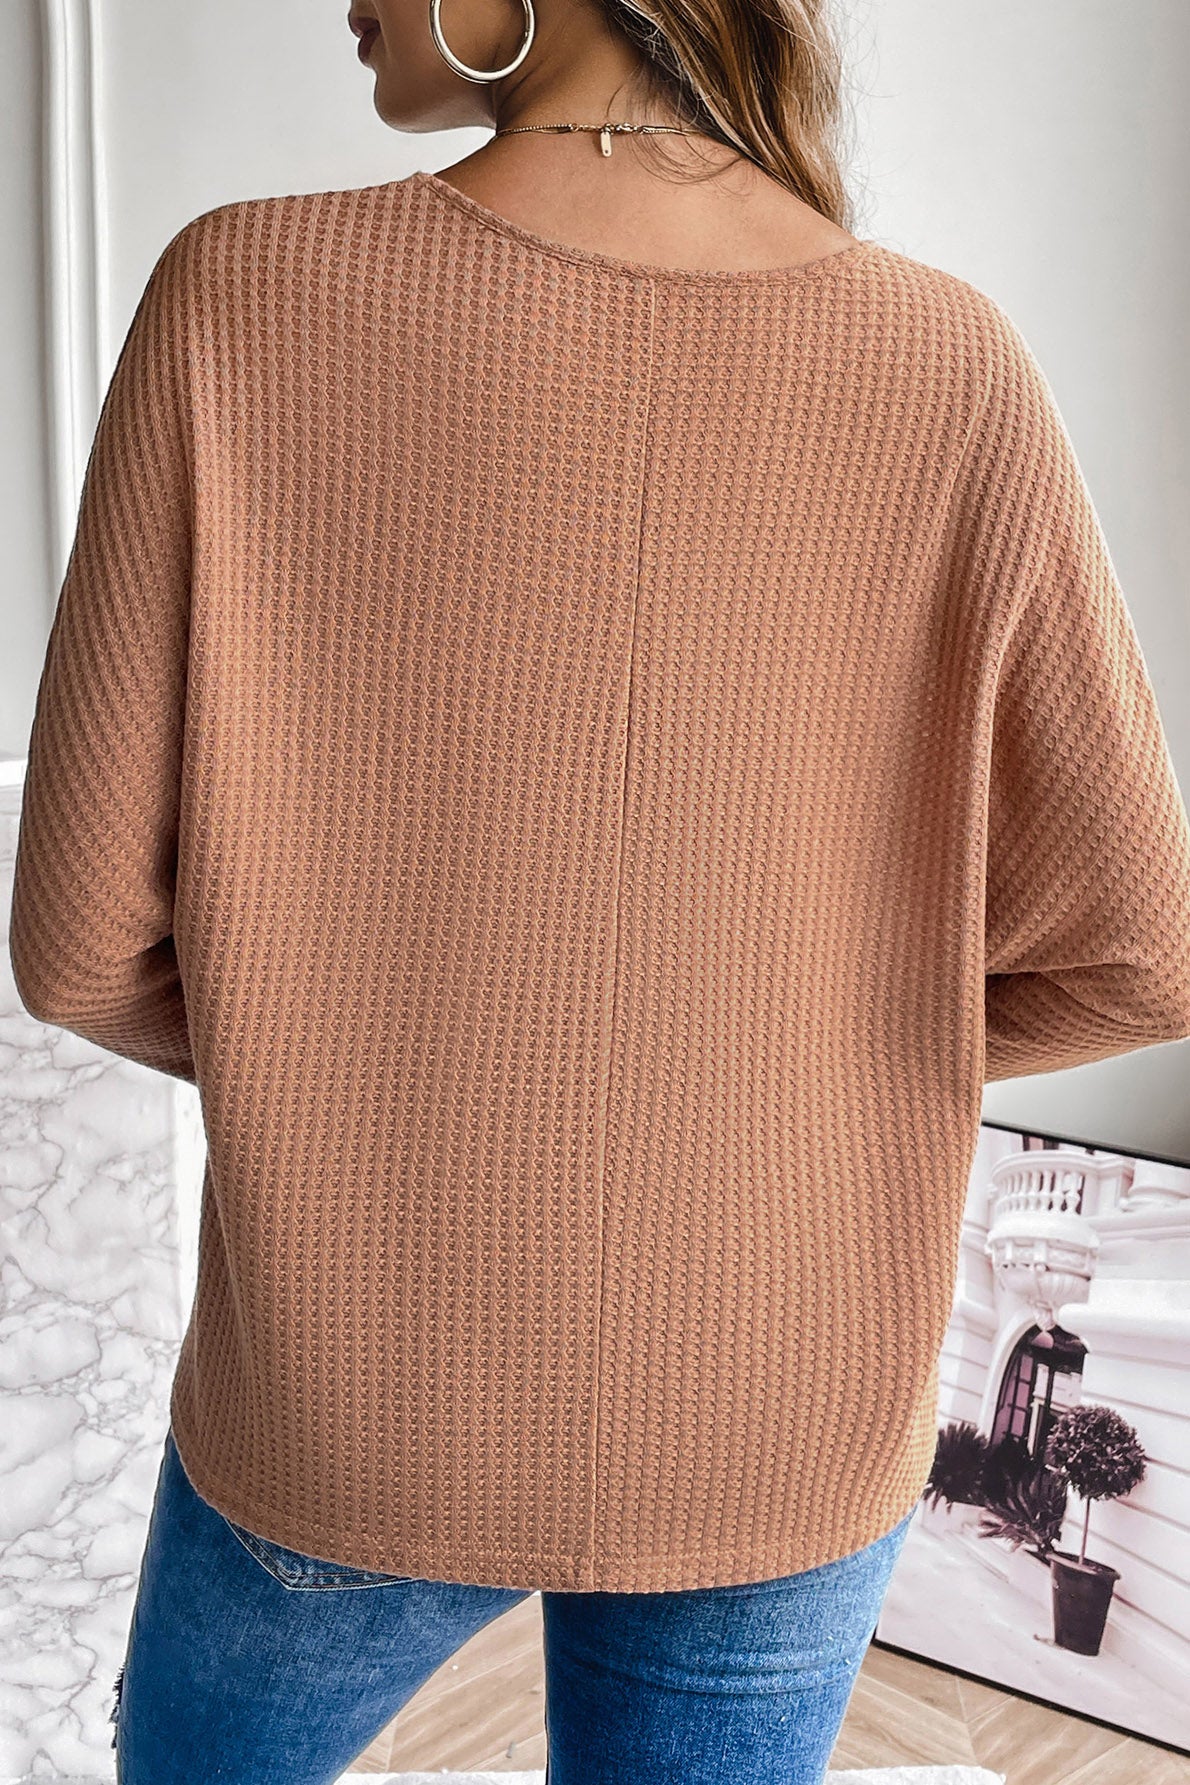 Rosy Brown Waffle-Knit Round Neck Top Sentient Beauty Fashions Apparel & Accessories